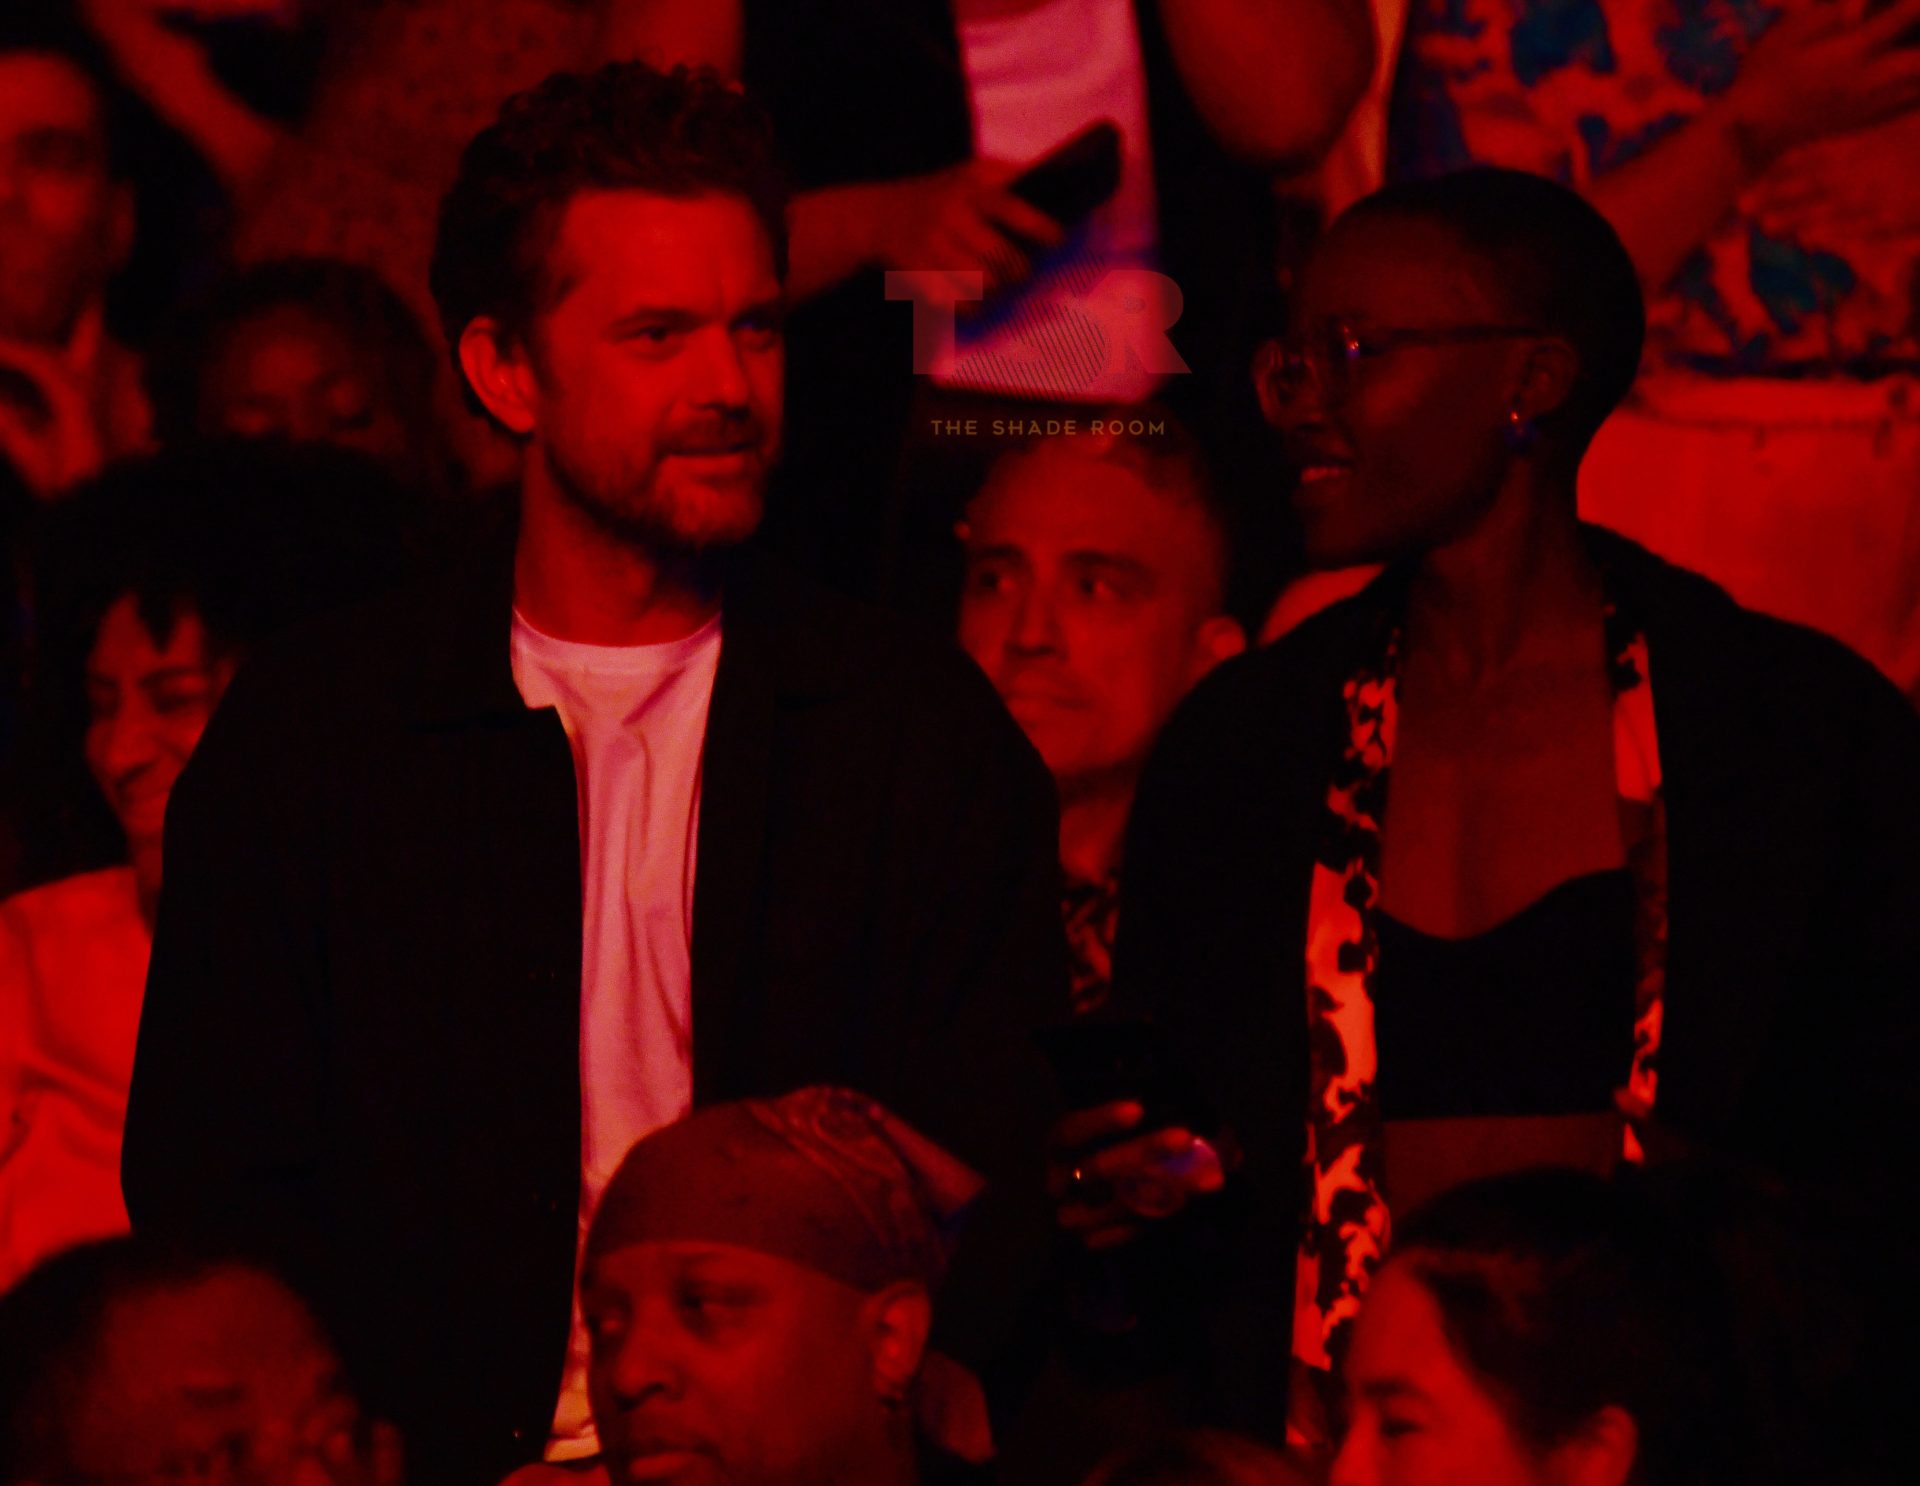 Actors Night Out! Joshua Jackson & Lupita Nyoung'o Enjoy Janelle Monáe's Concert With Friends (Exclusive)